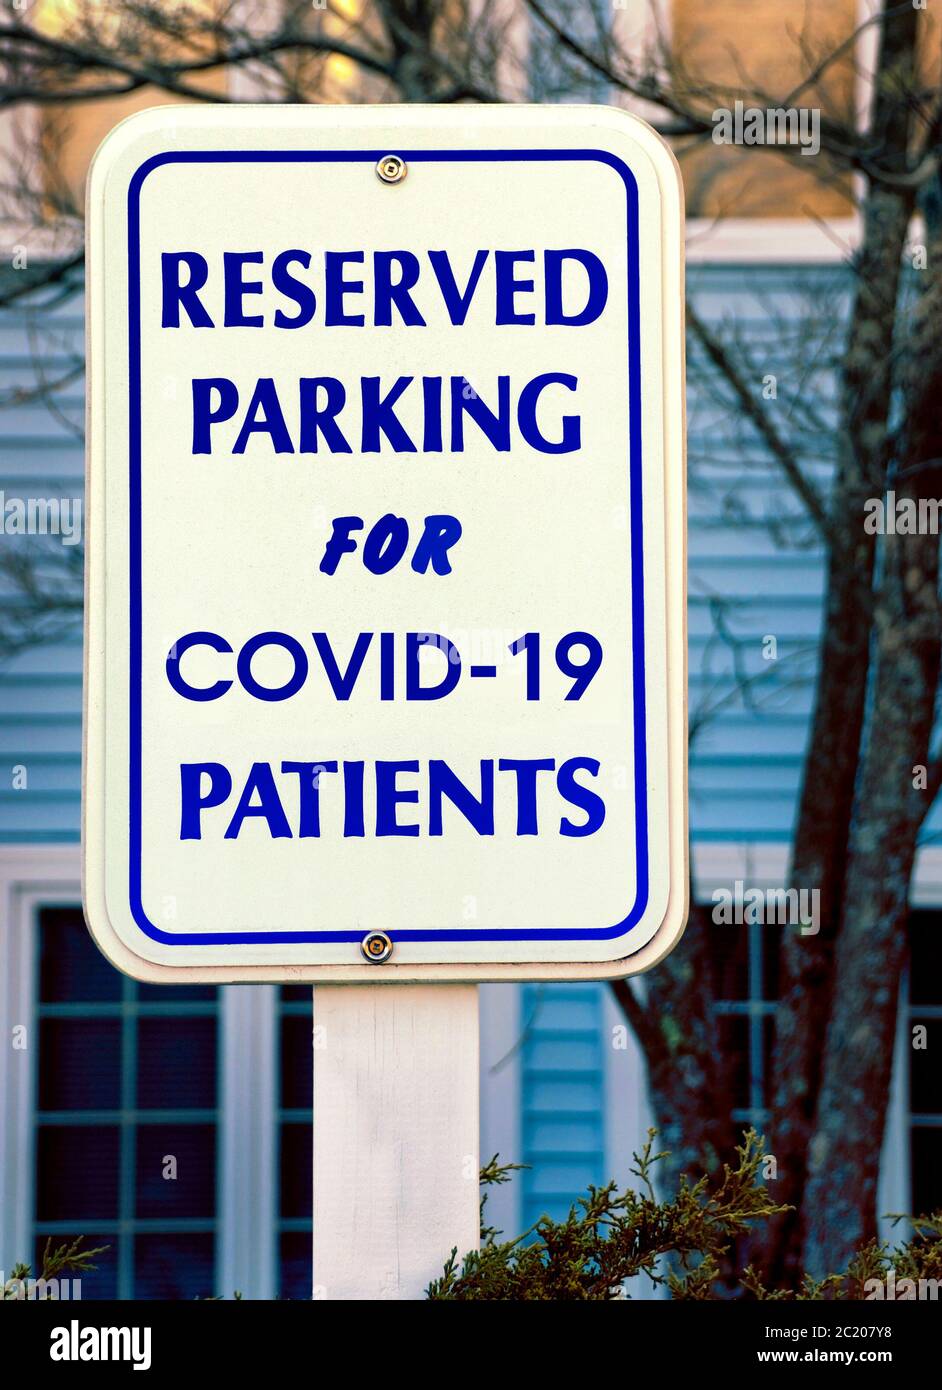 Parking sign indicates where COVID-19 patients should park at a medical testing and treatment facility parking lot. Stock Photo